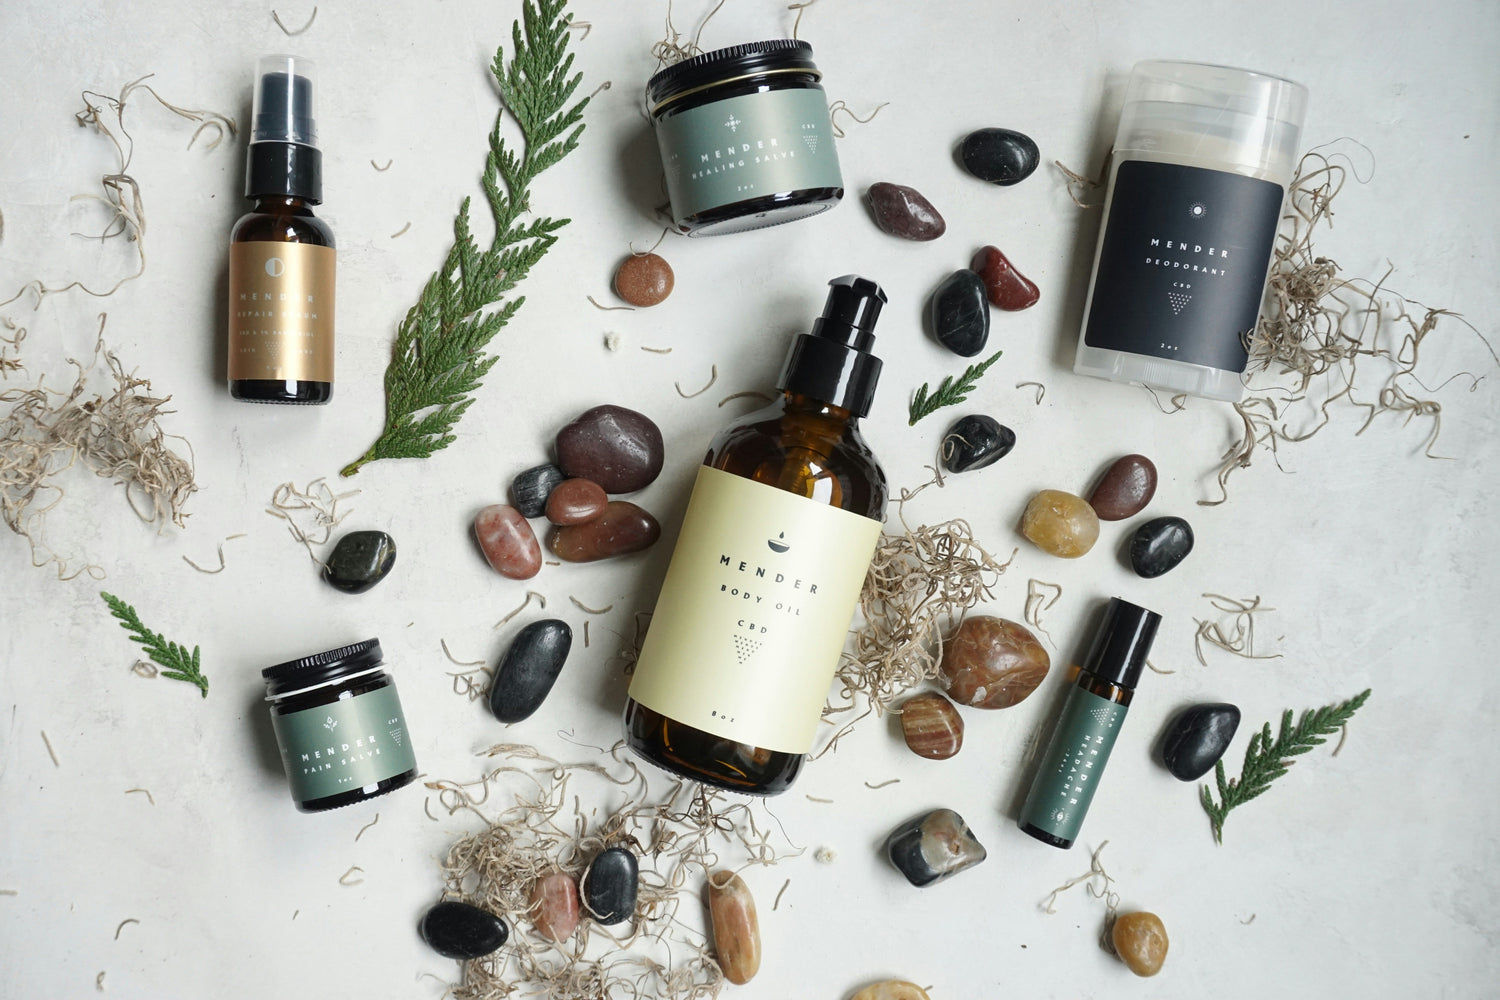 Beauty, relaxation, and self-care essentials